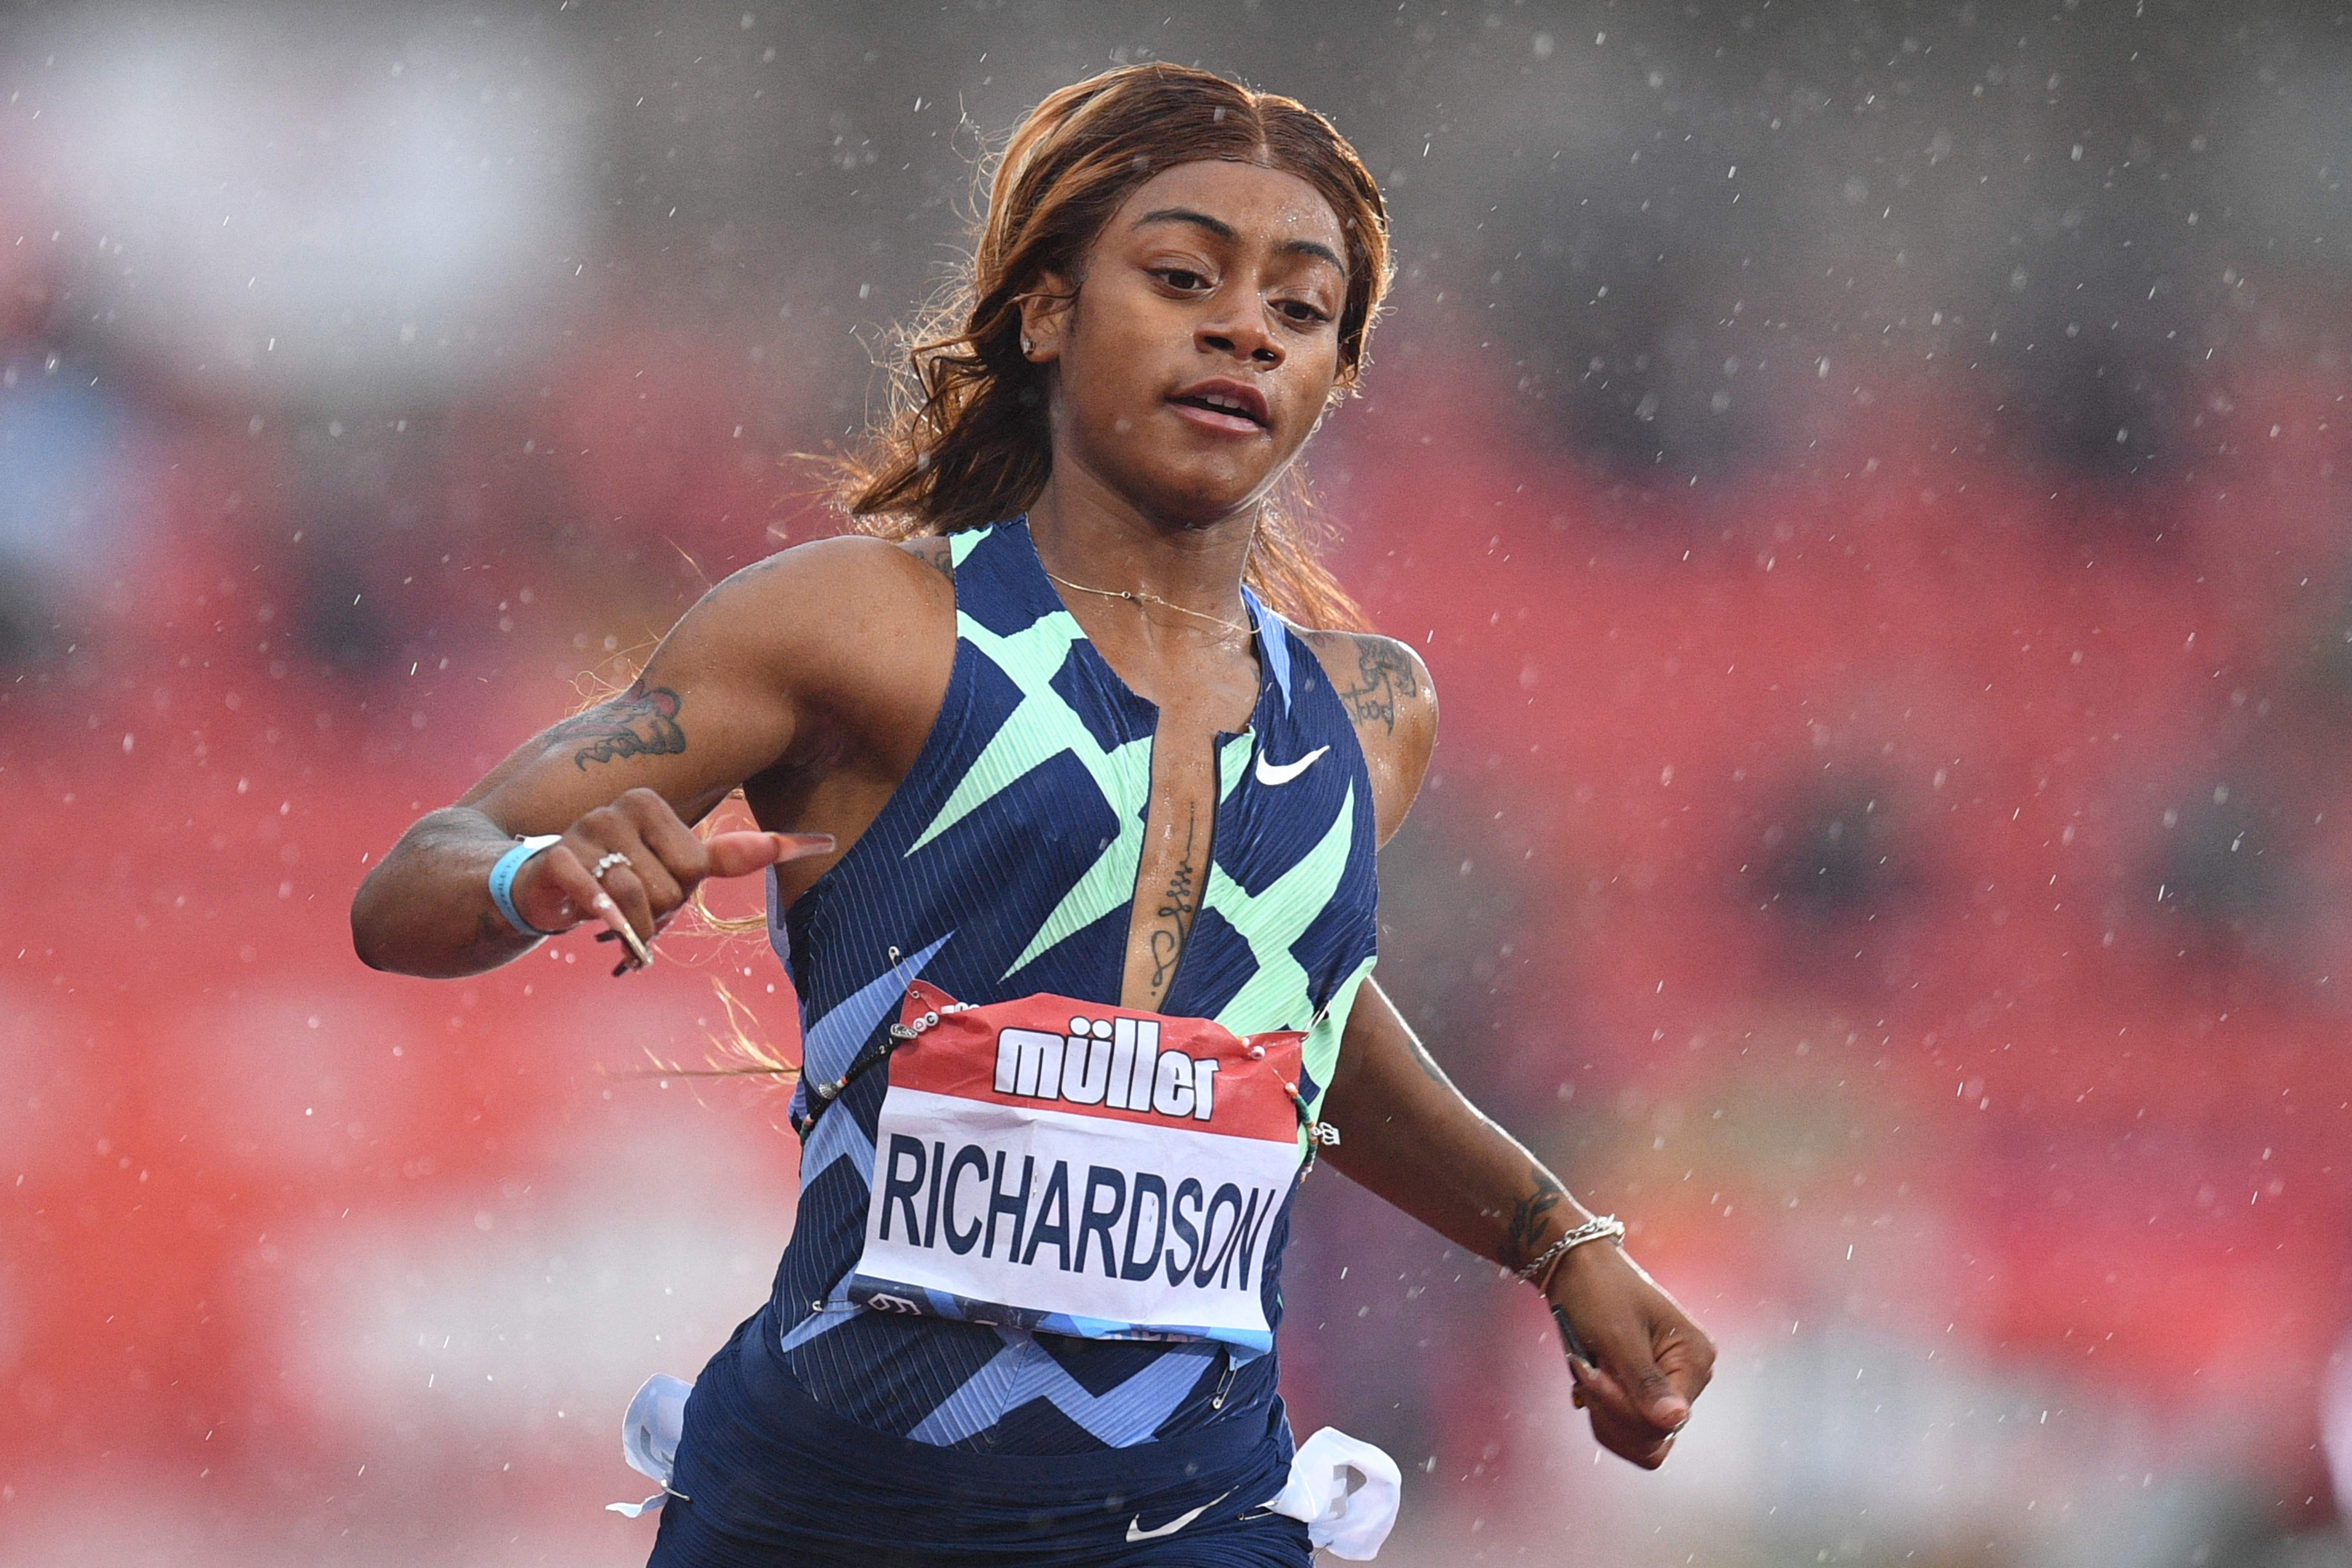 Sha’Carri Richardson, 21, was issued a 30-day suspension from the US Olympic team after testing positive for THC